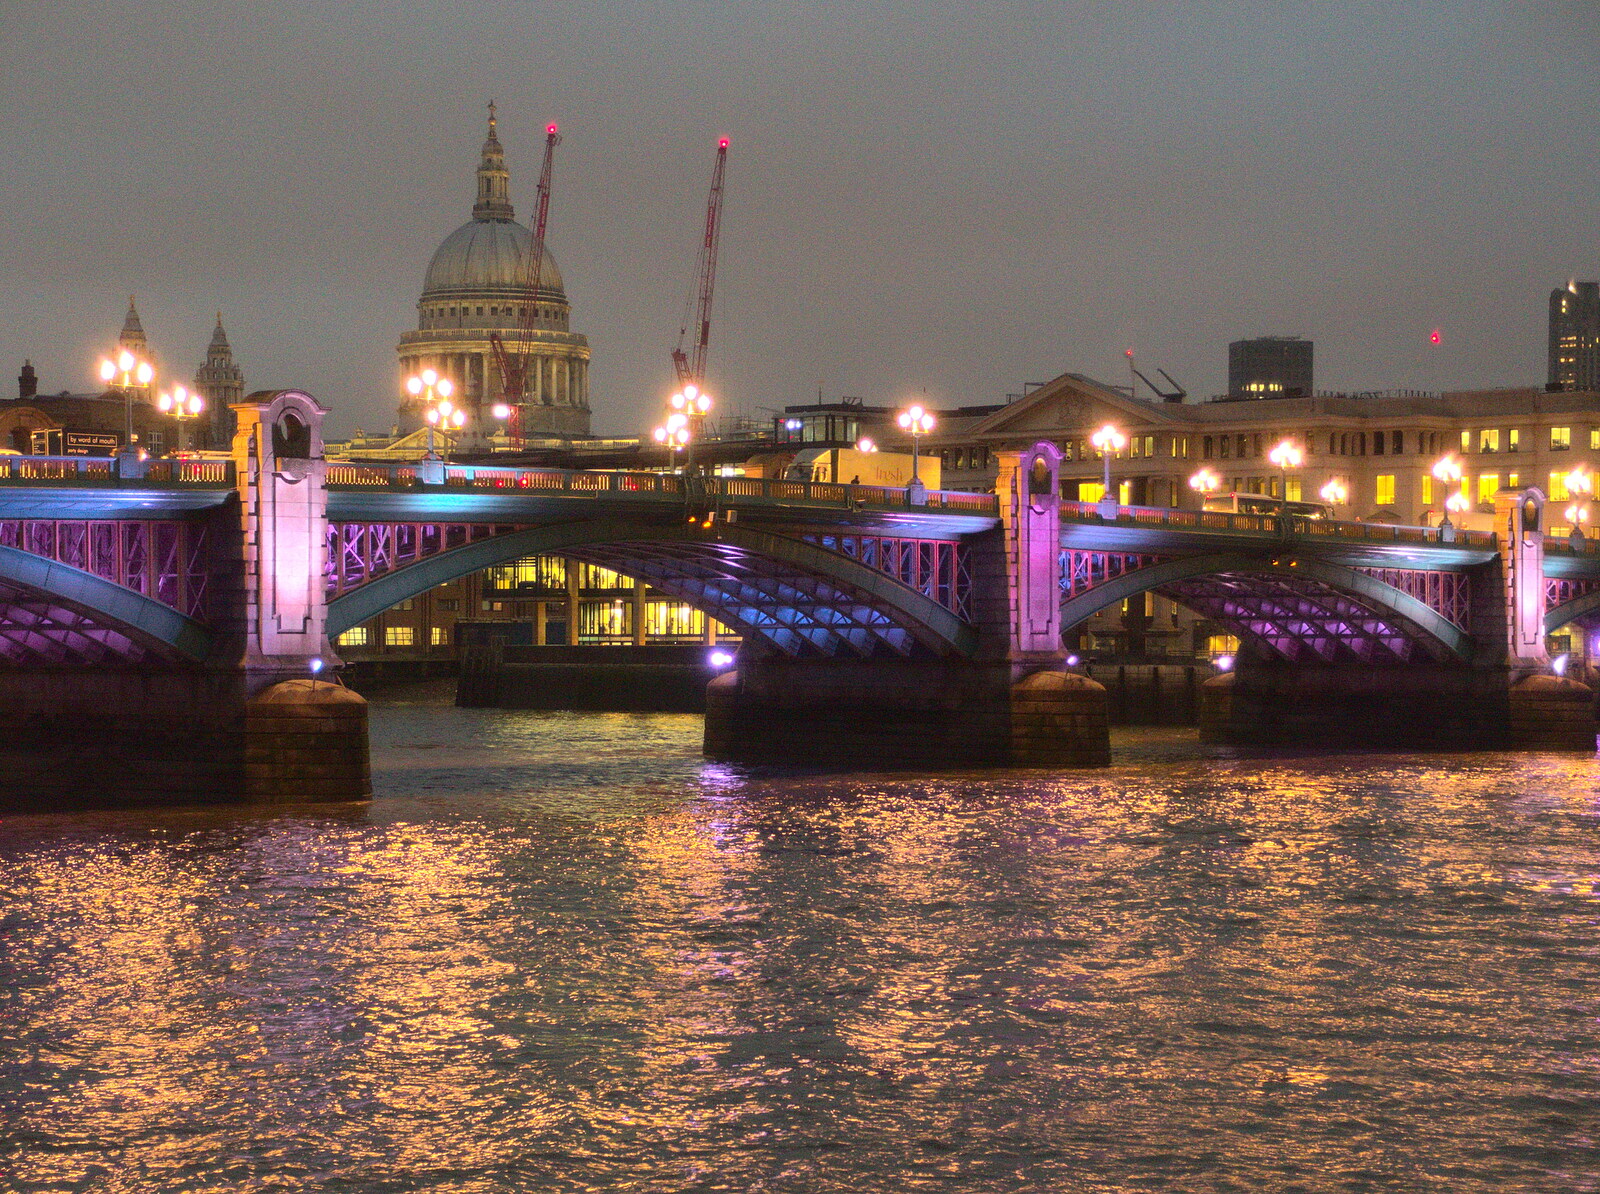 Soutwark Bridge and St. Paul's from Innovation Week and a Walk Around the South Bank, Southwark - 8th December 2016